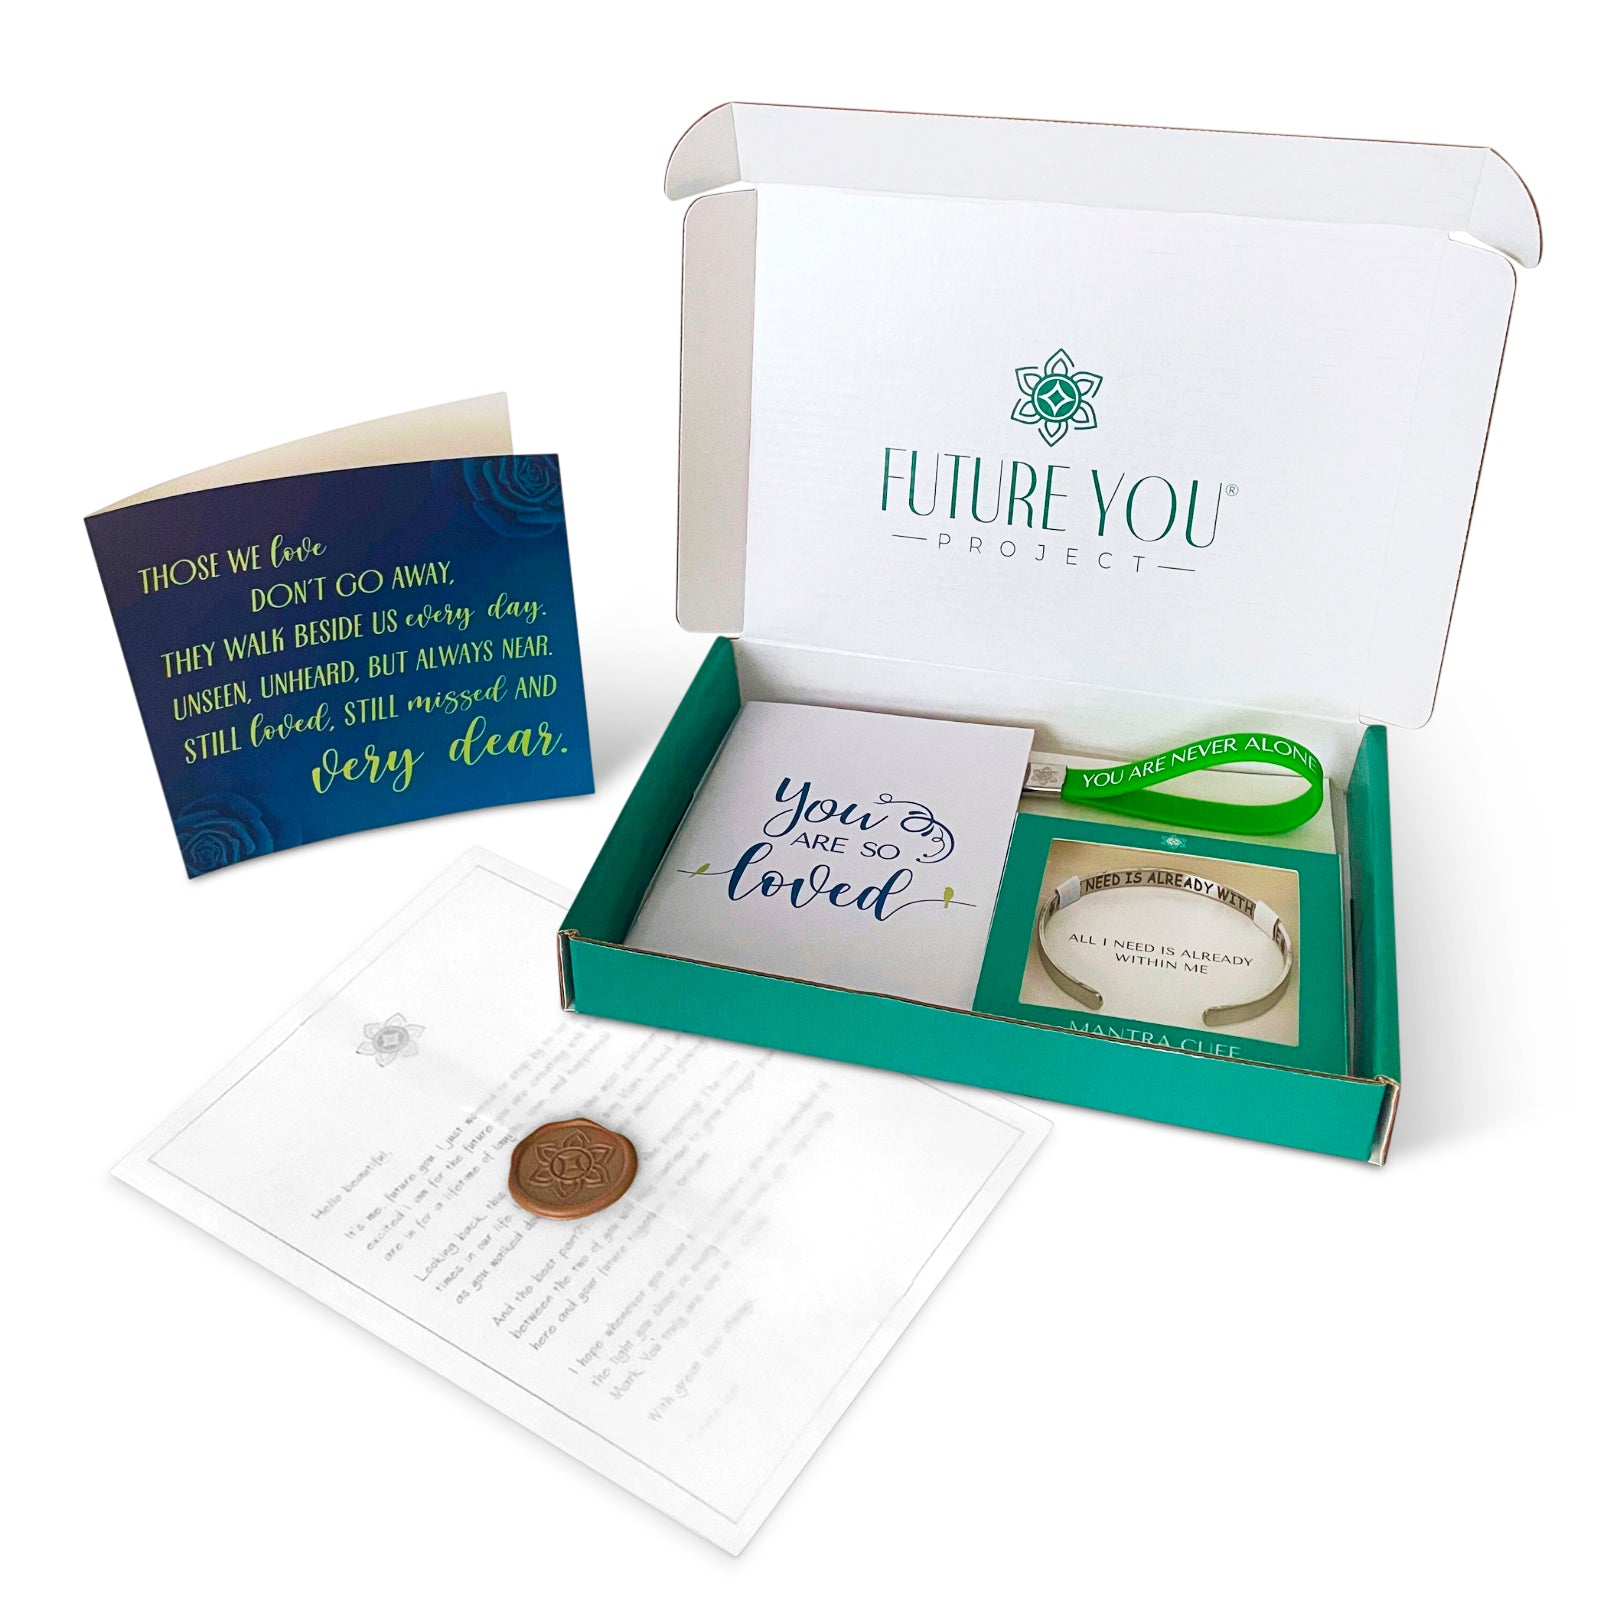 Deepest Condolences gift box with Future You Letter™